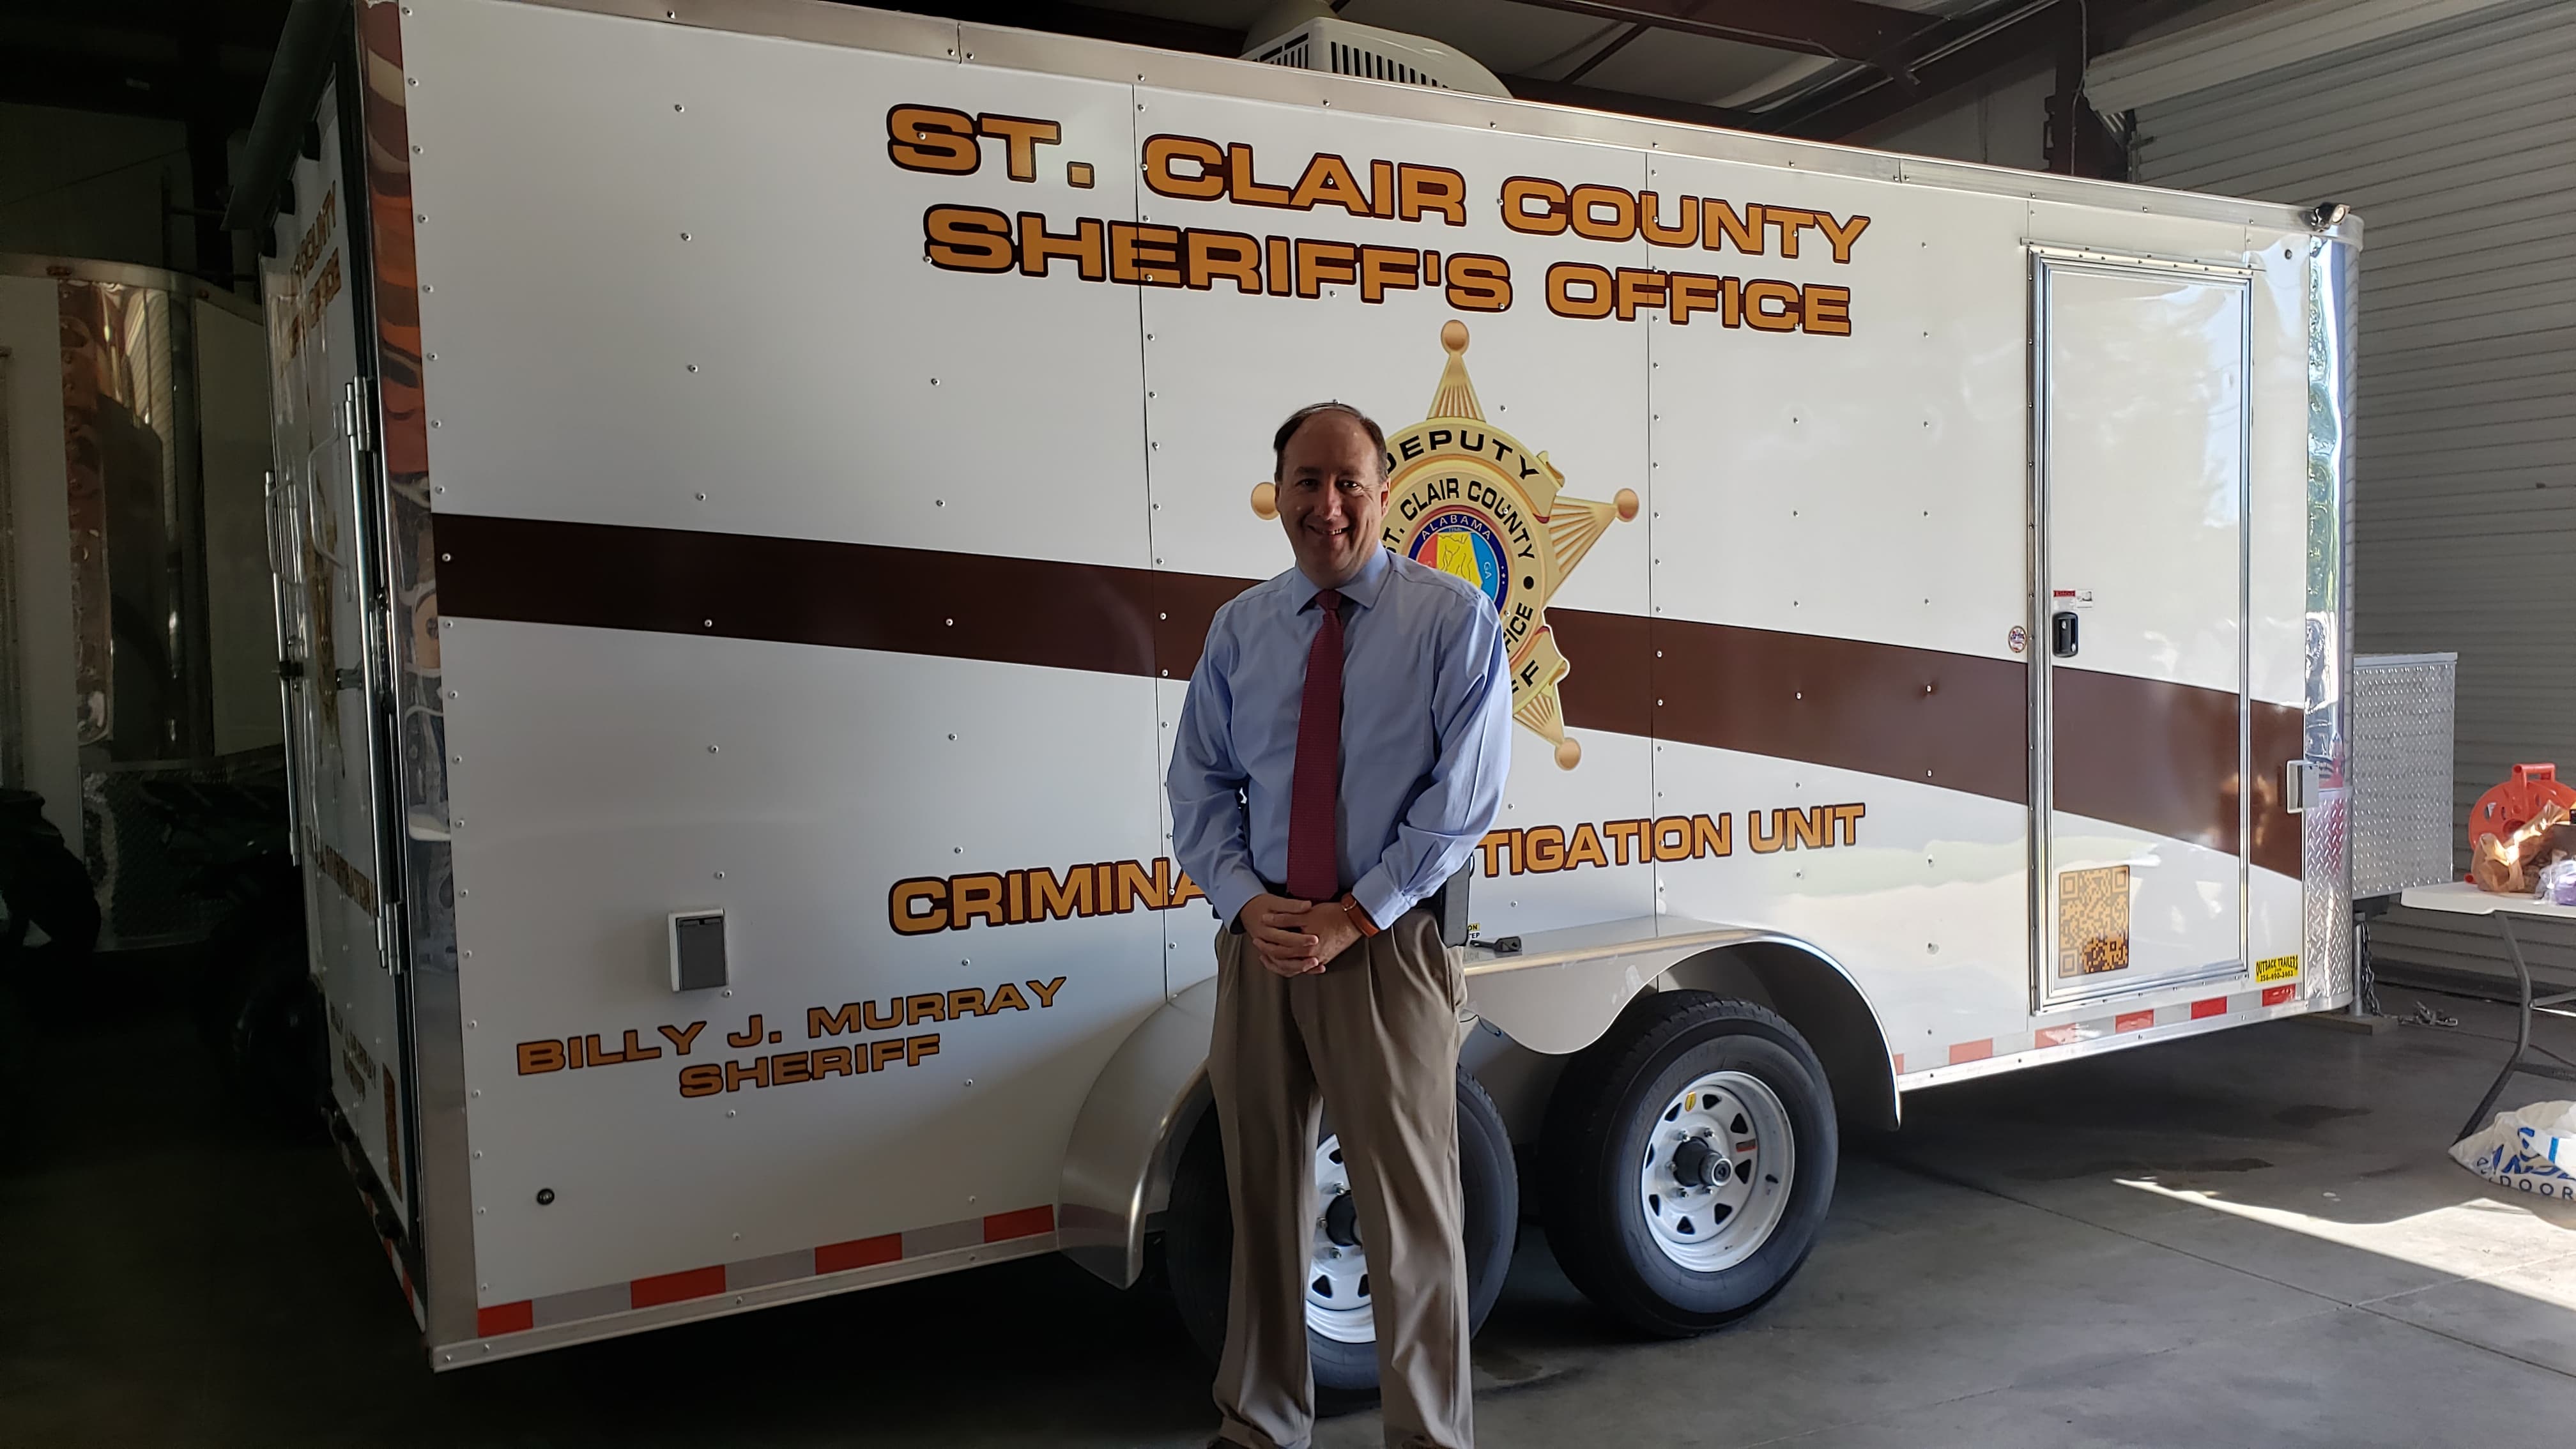 St. Clair County Sheriff's Office shows off new mobile crime unit